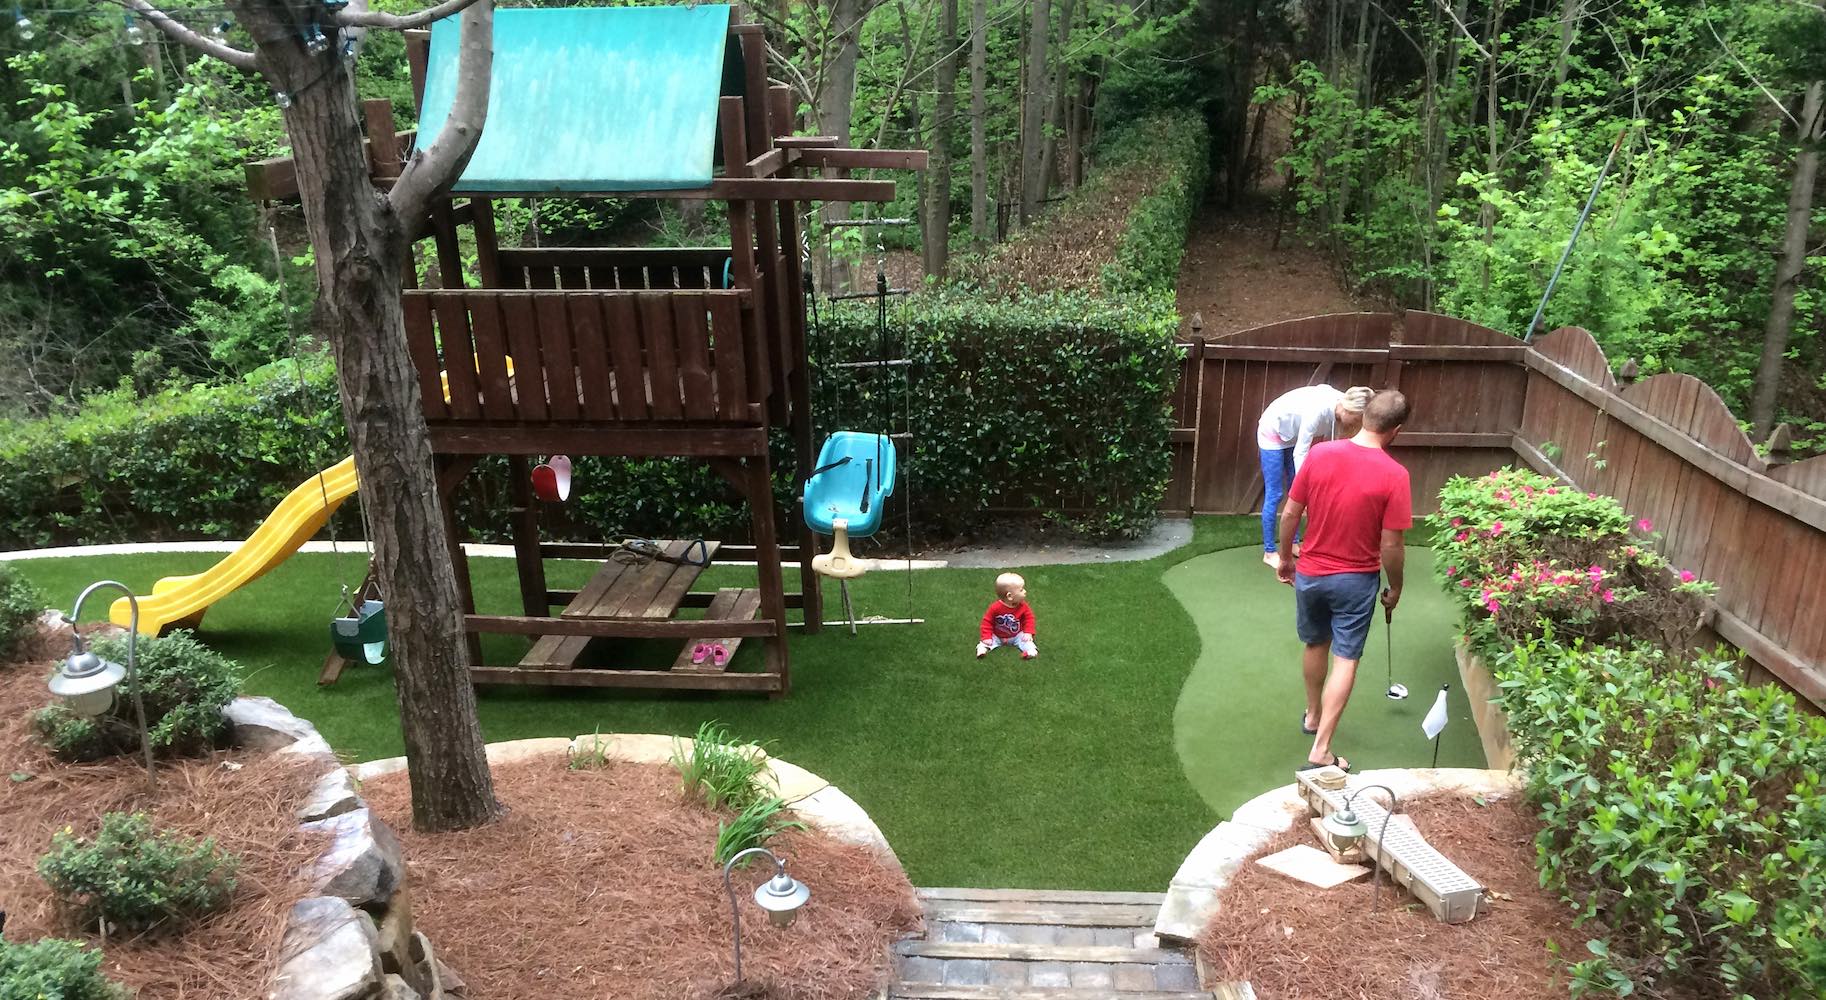 A person is playing miniature golf in a backyard with synthetic turf, landscaping, a swing set, and slide. Another person is watching a child nearby.